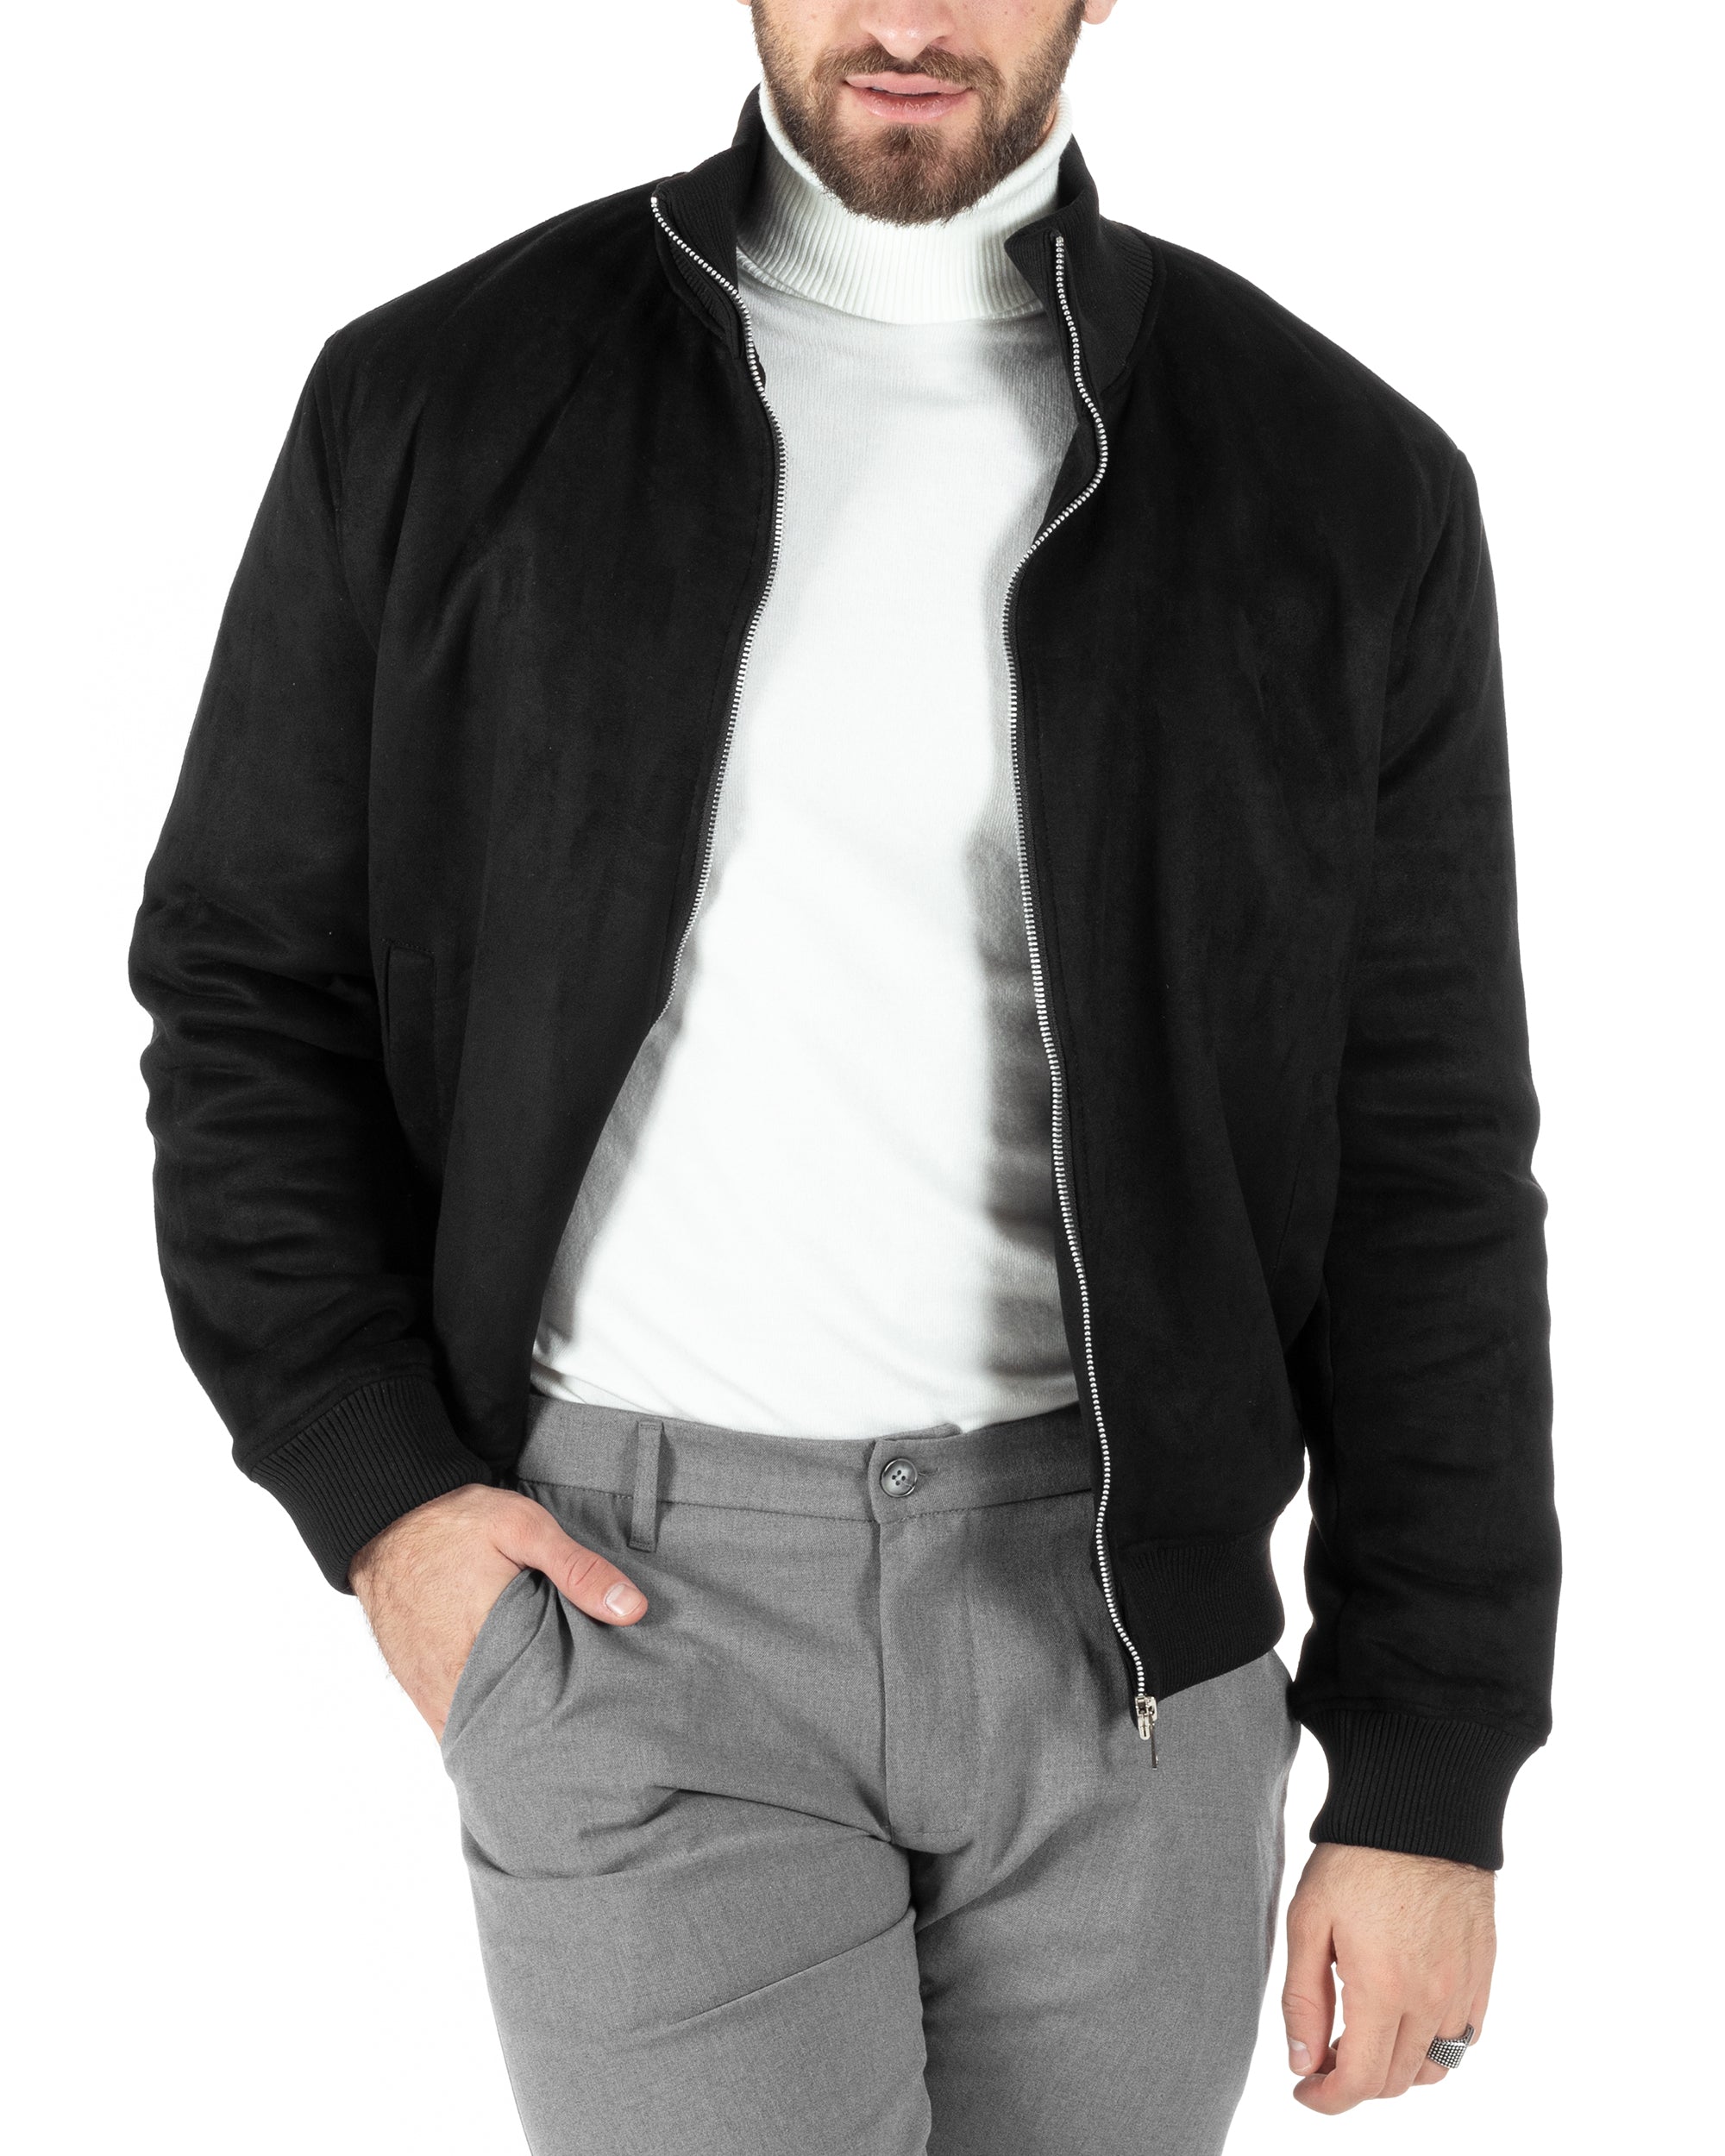 Men's Suede Long Sleeve Solid Color Casual Black Jacket GIOSAL-G2993A